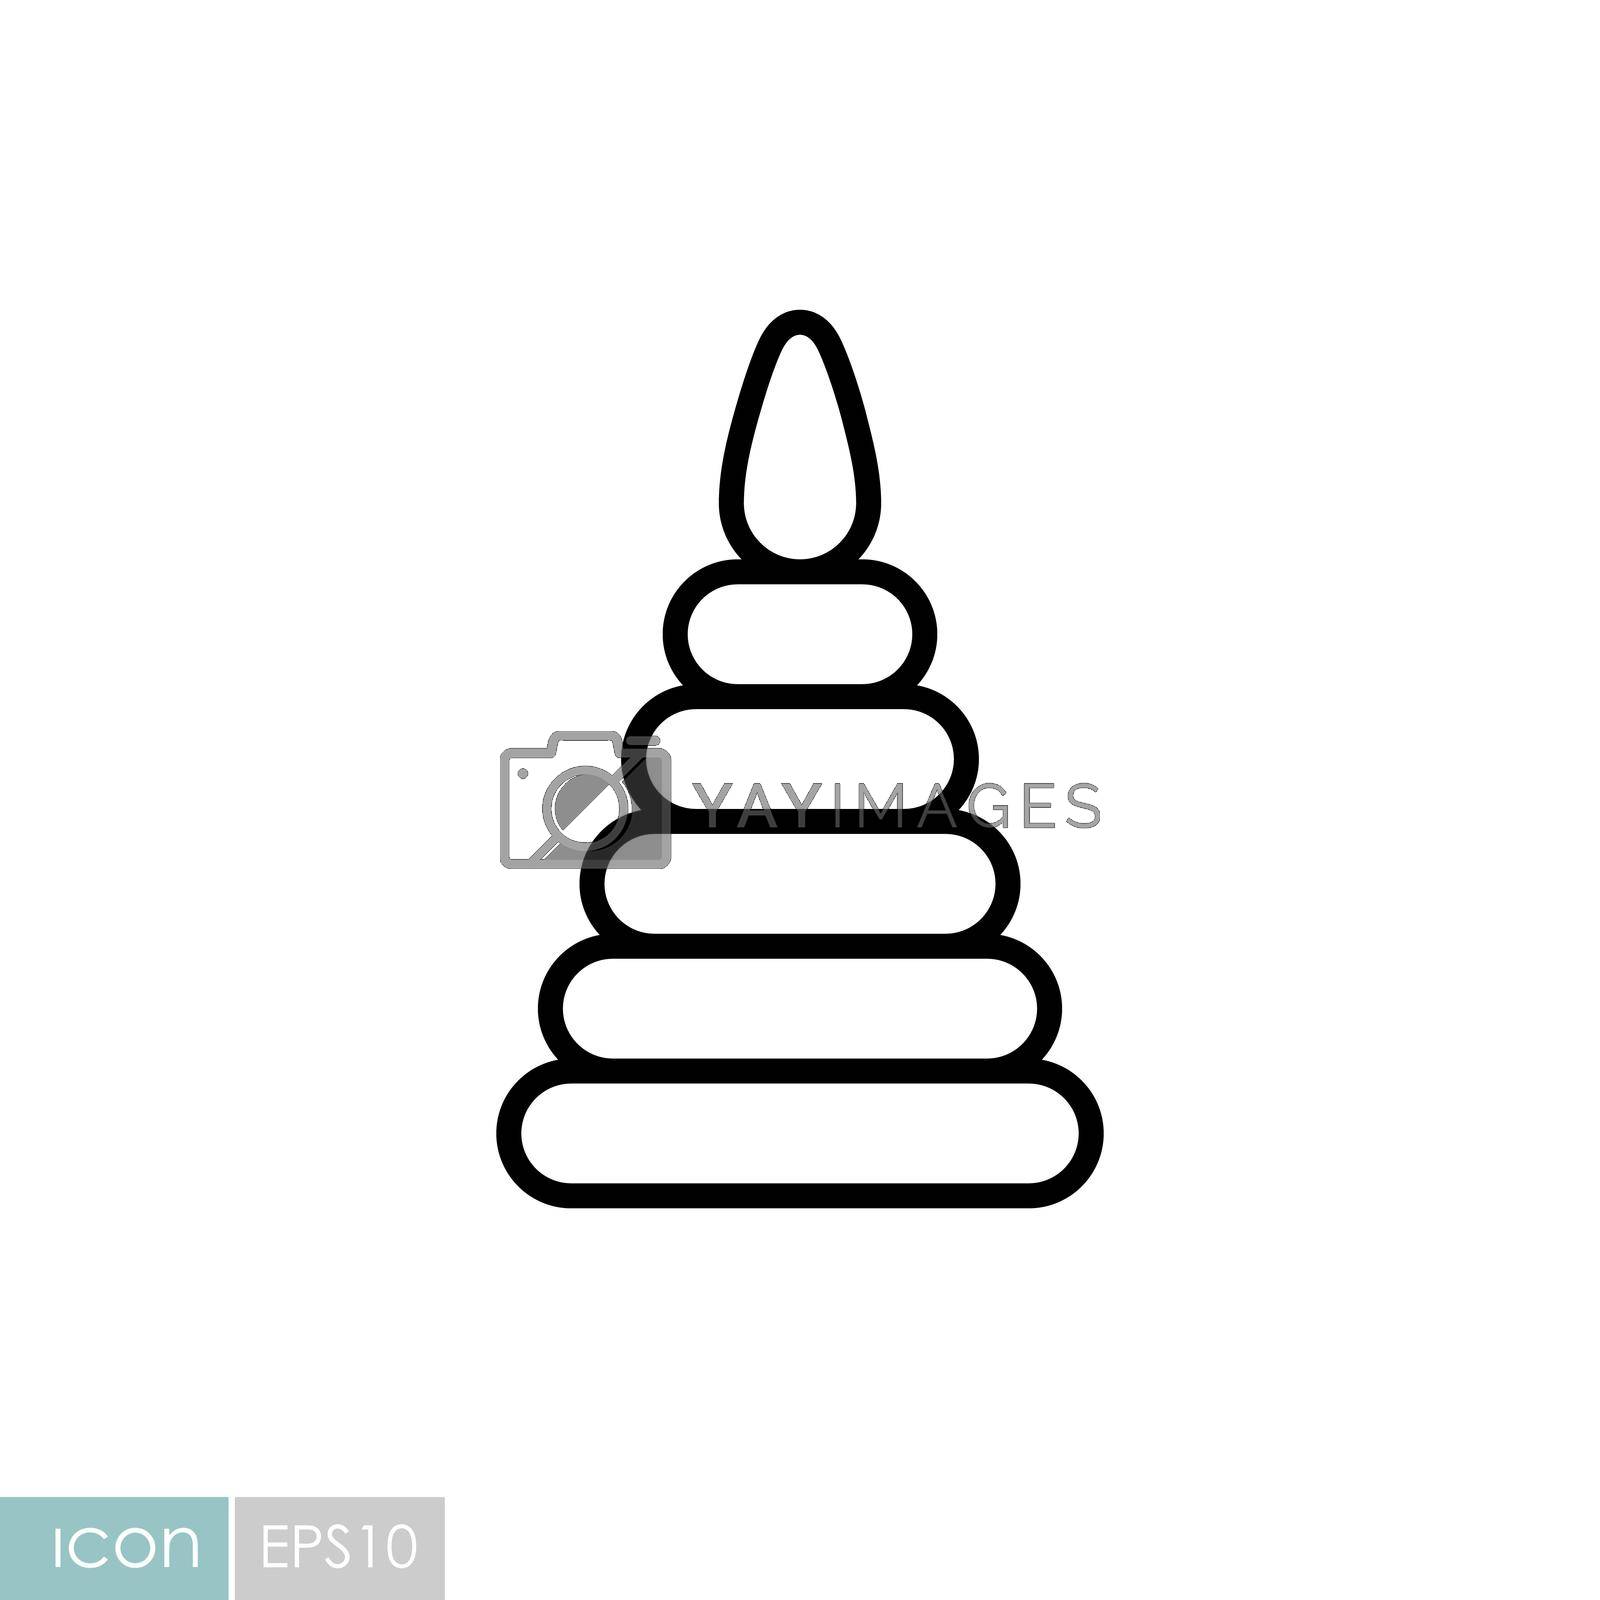 Pyramid toy vector isolated icon. Graph symbol for children and newborn babies web site and apps design, logo, app, UI